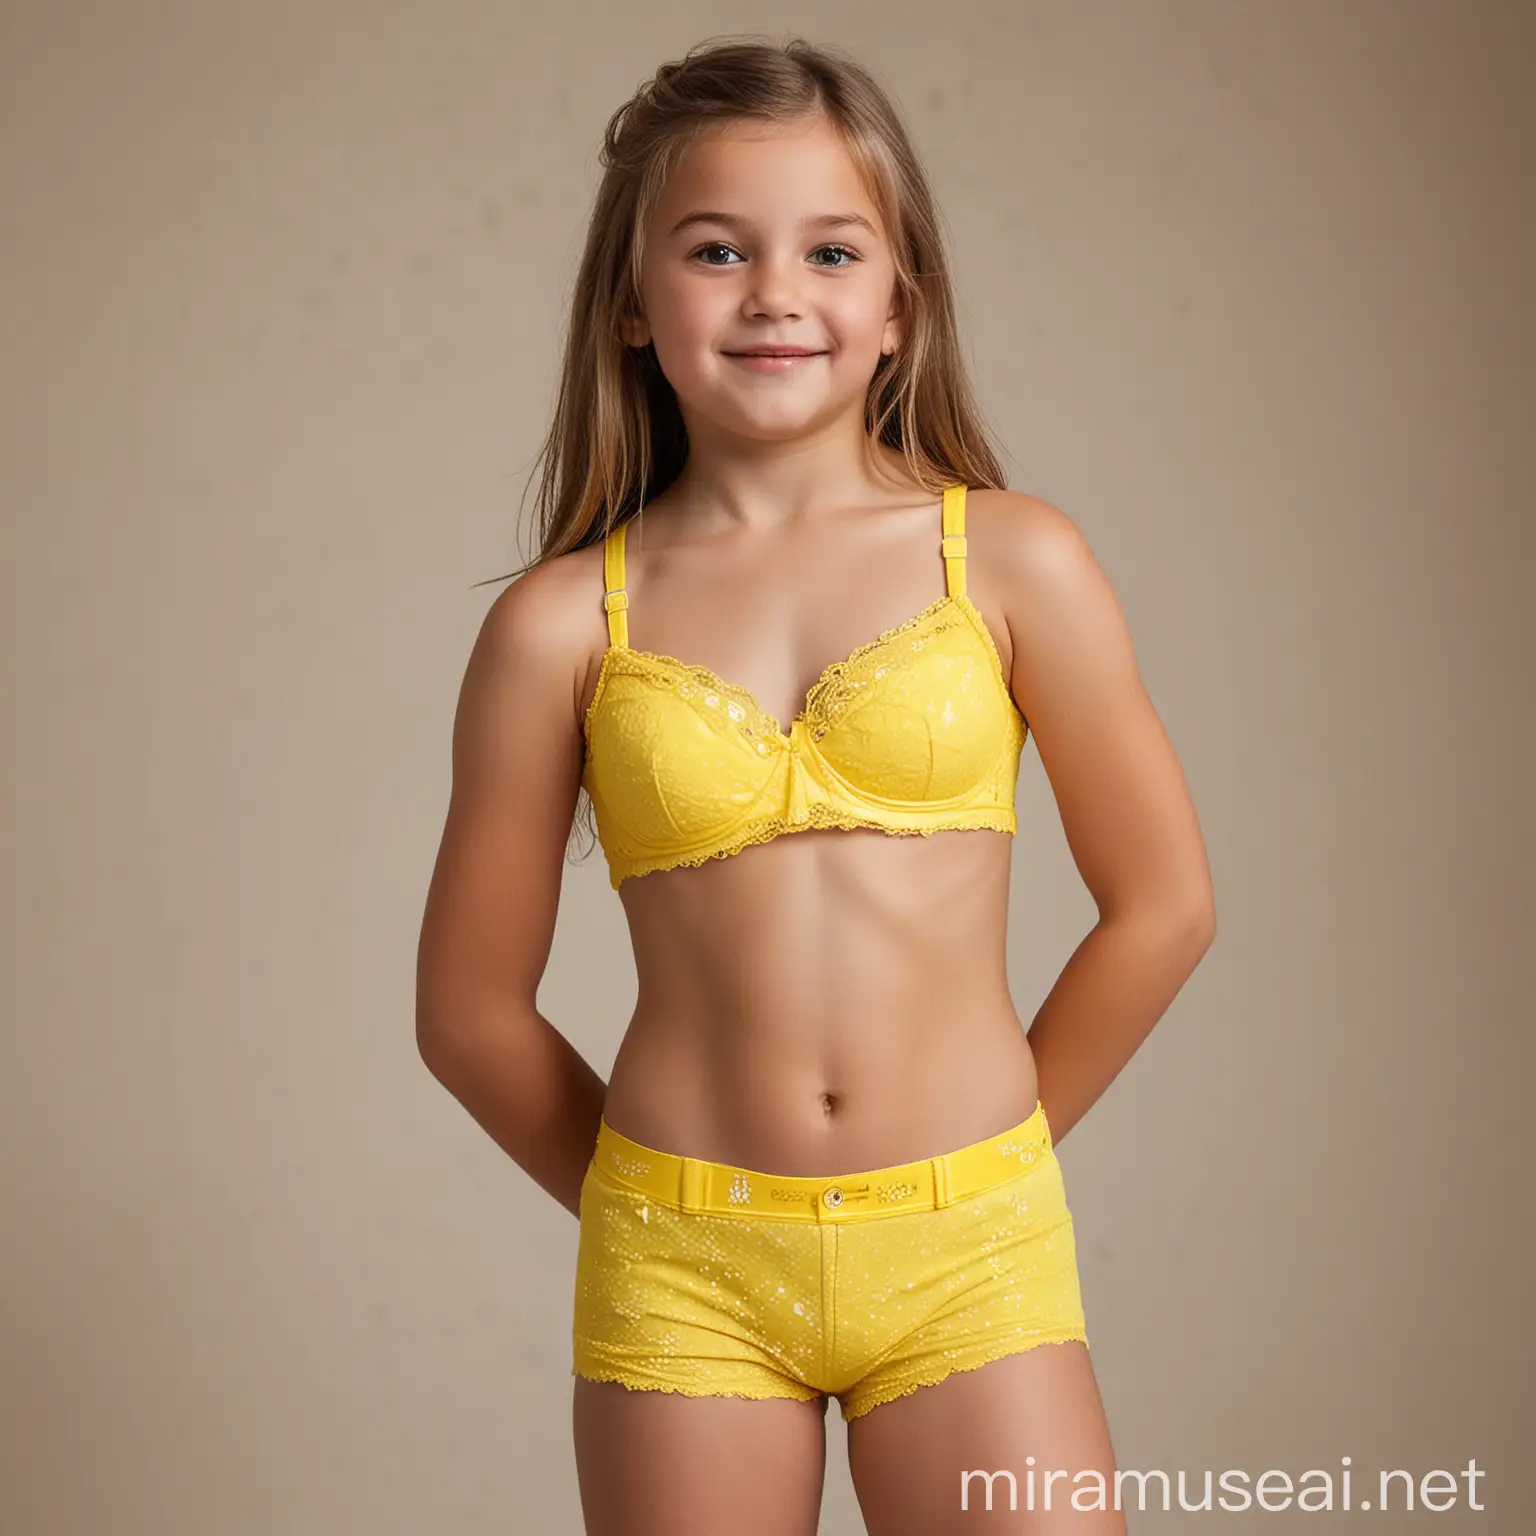 A beautiful 10-year-old girl in a yellow bra and very tight shorts